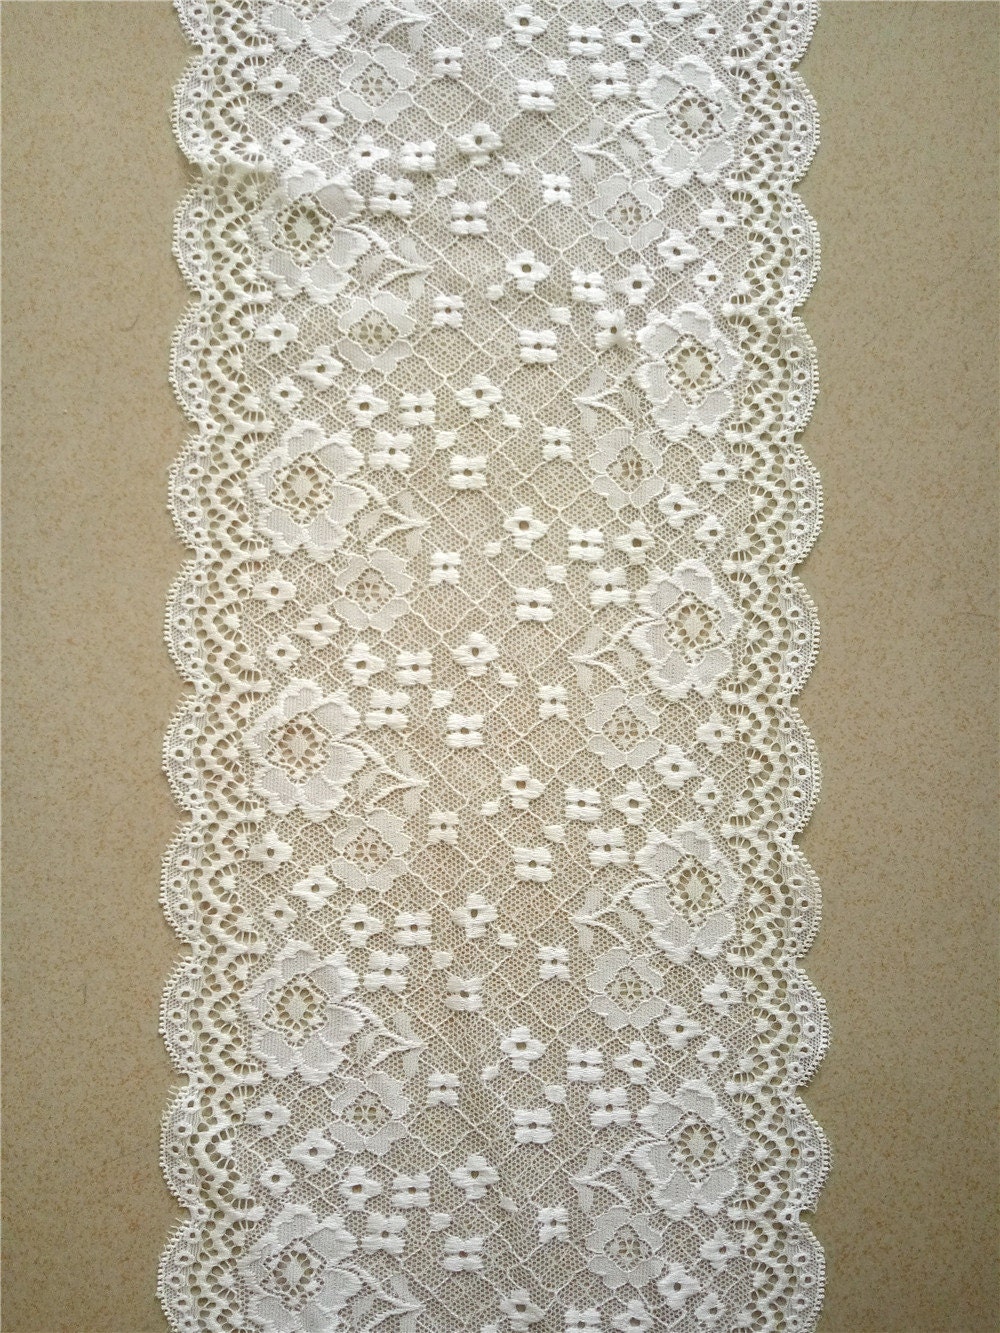 White lace table runner 7 wedding table runner lace